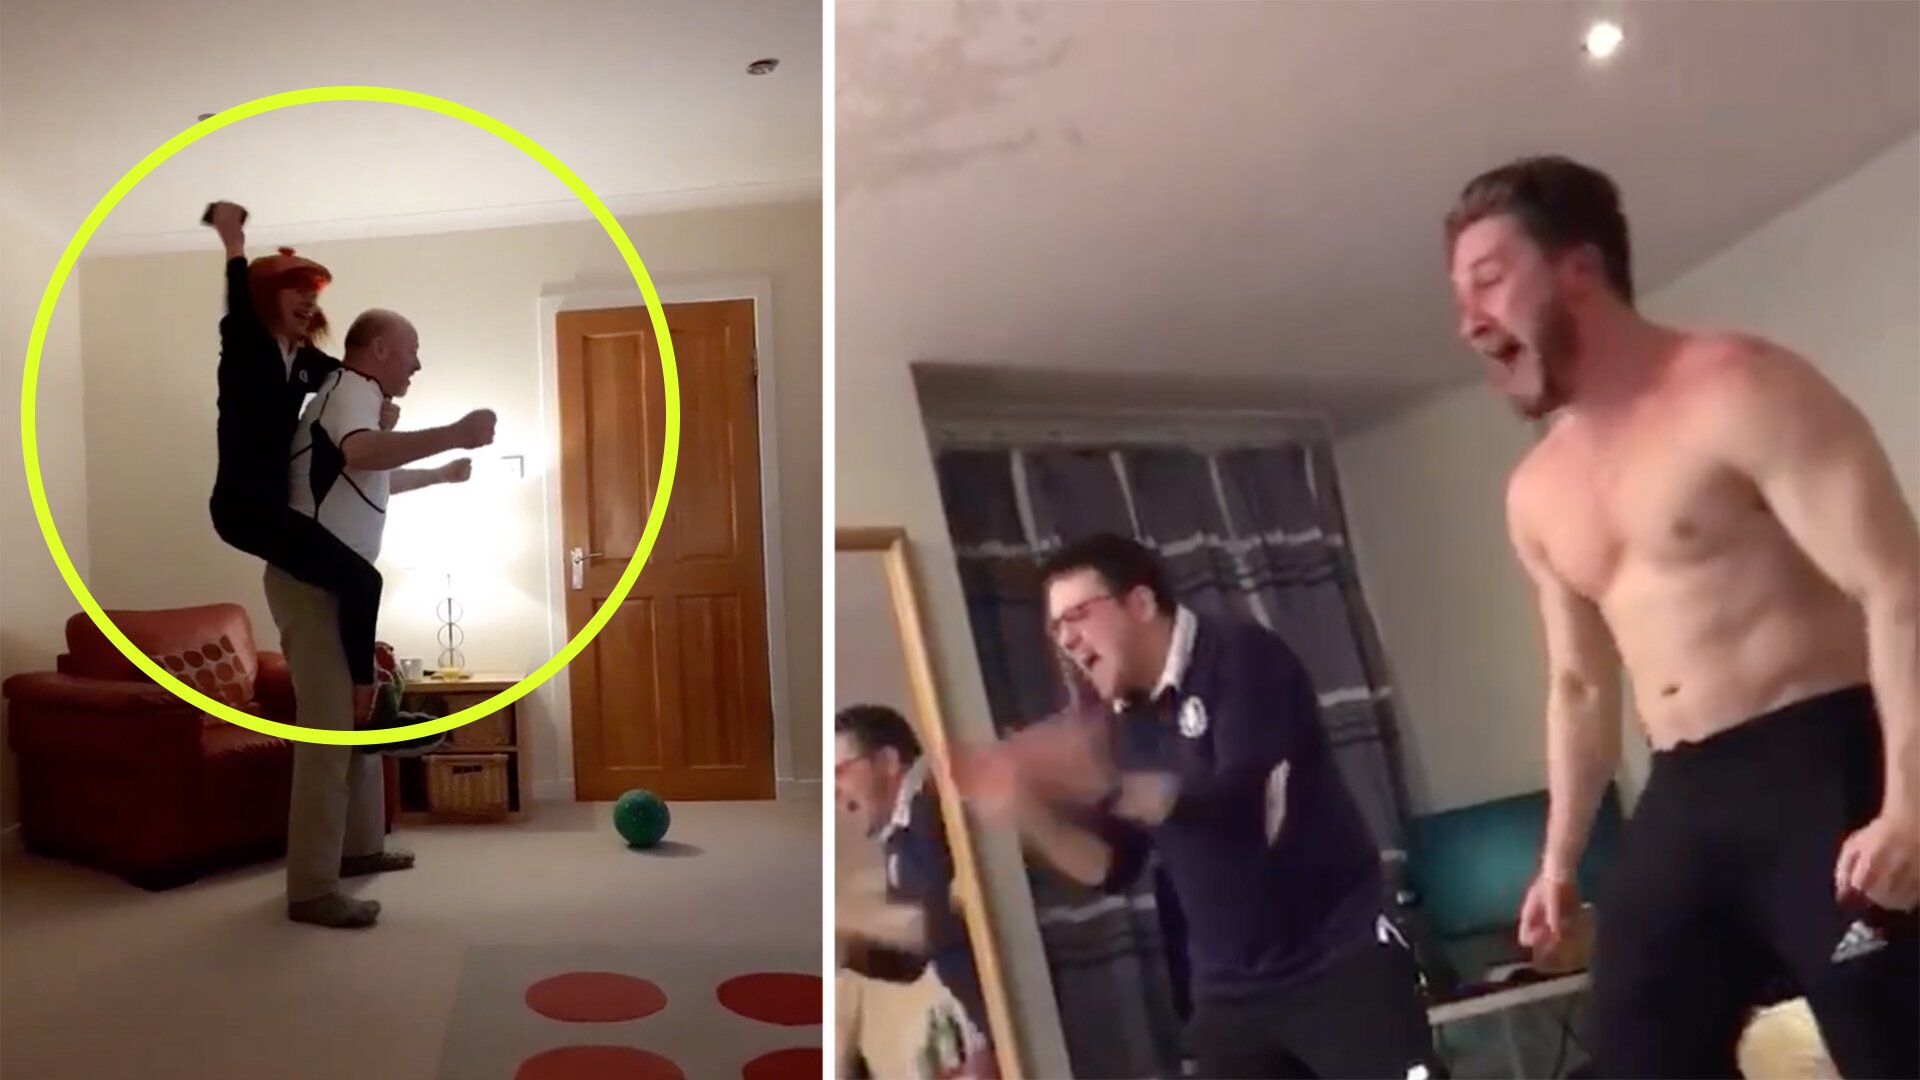 Footage showing Scotland rugby fans celebrating victory over England going viral